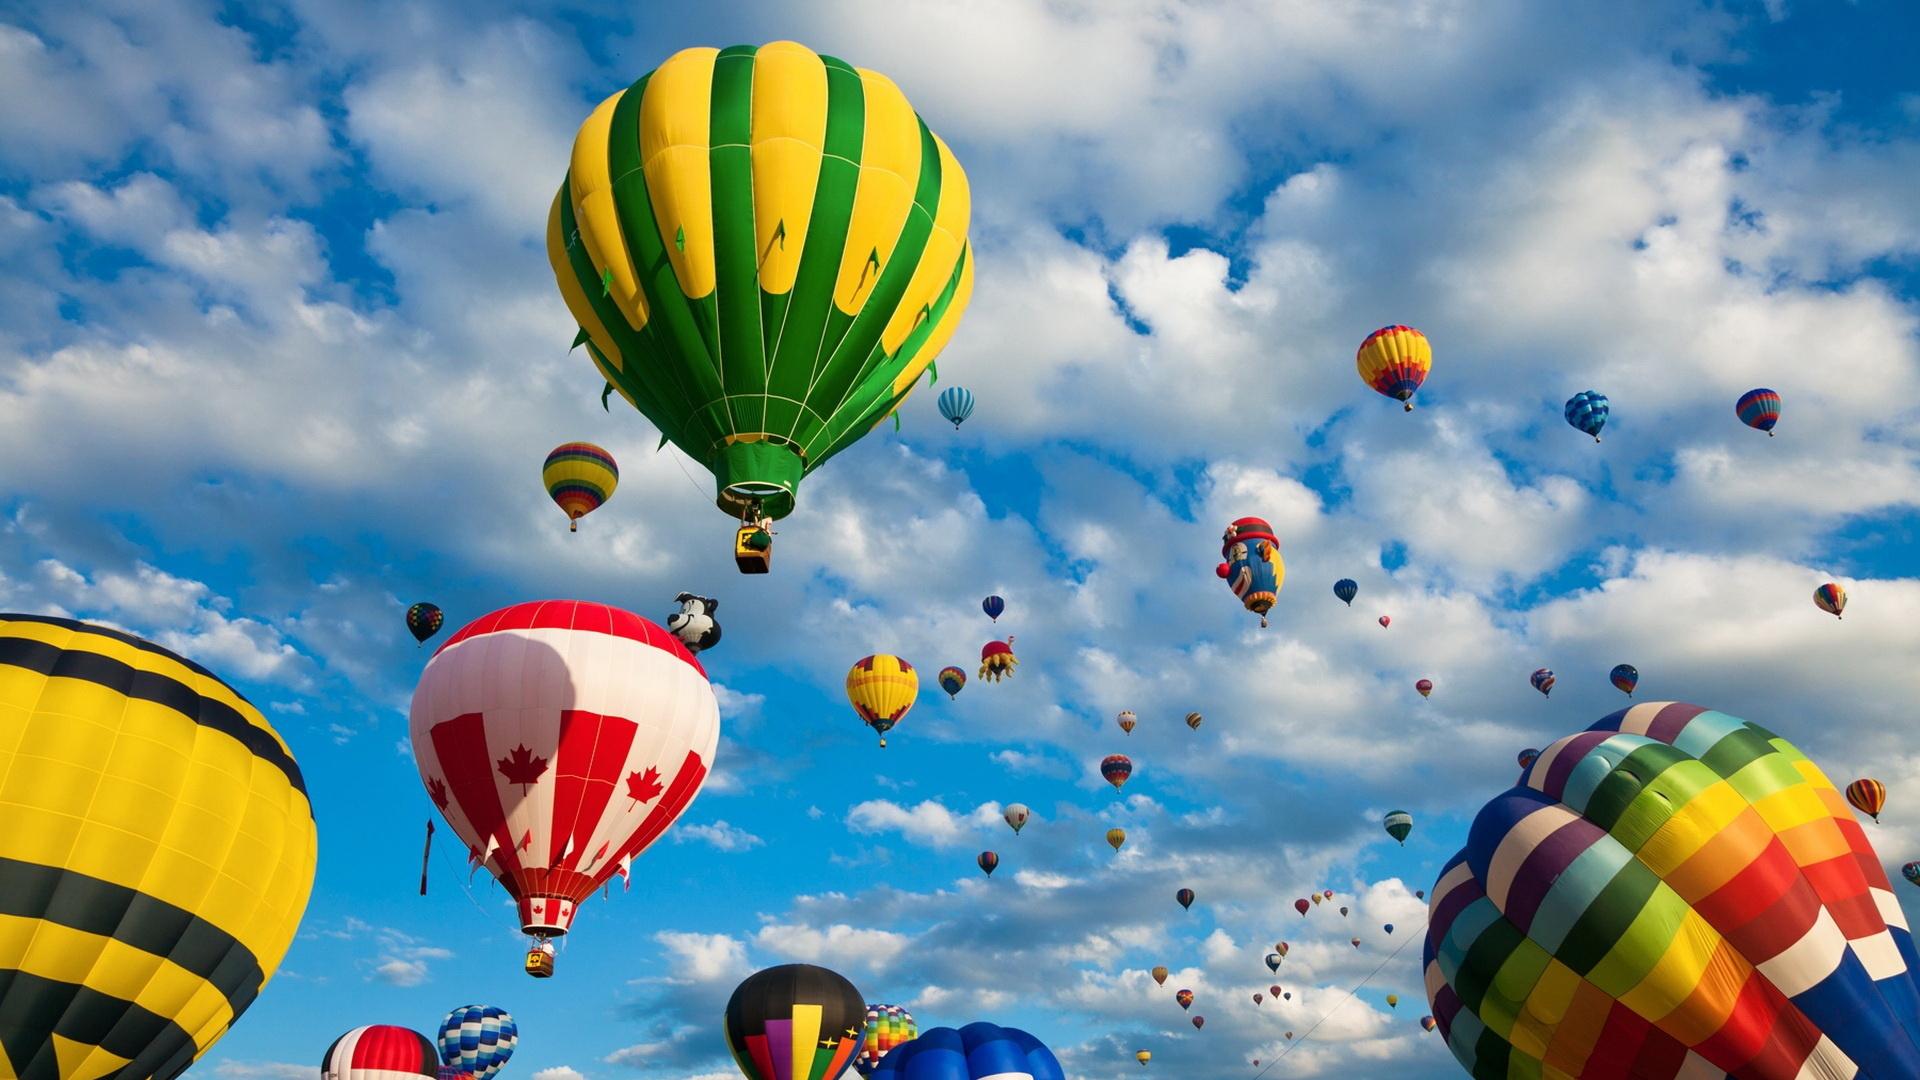 Colorful Balloons Desktop Wallpaper and Images | Cool Wallpapers